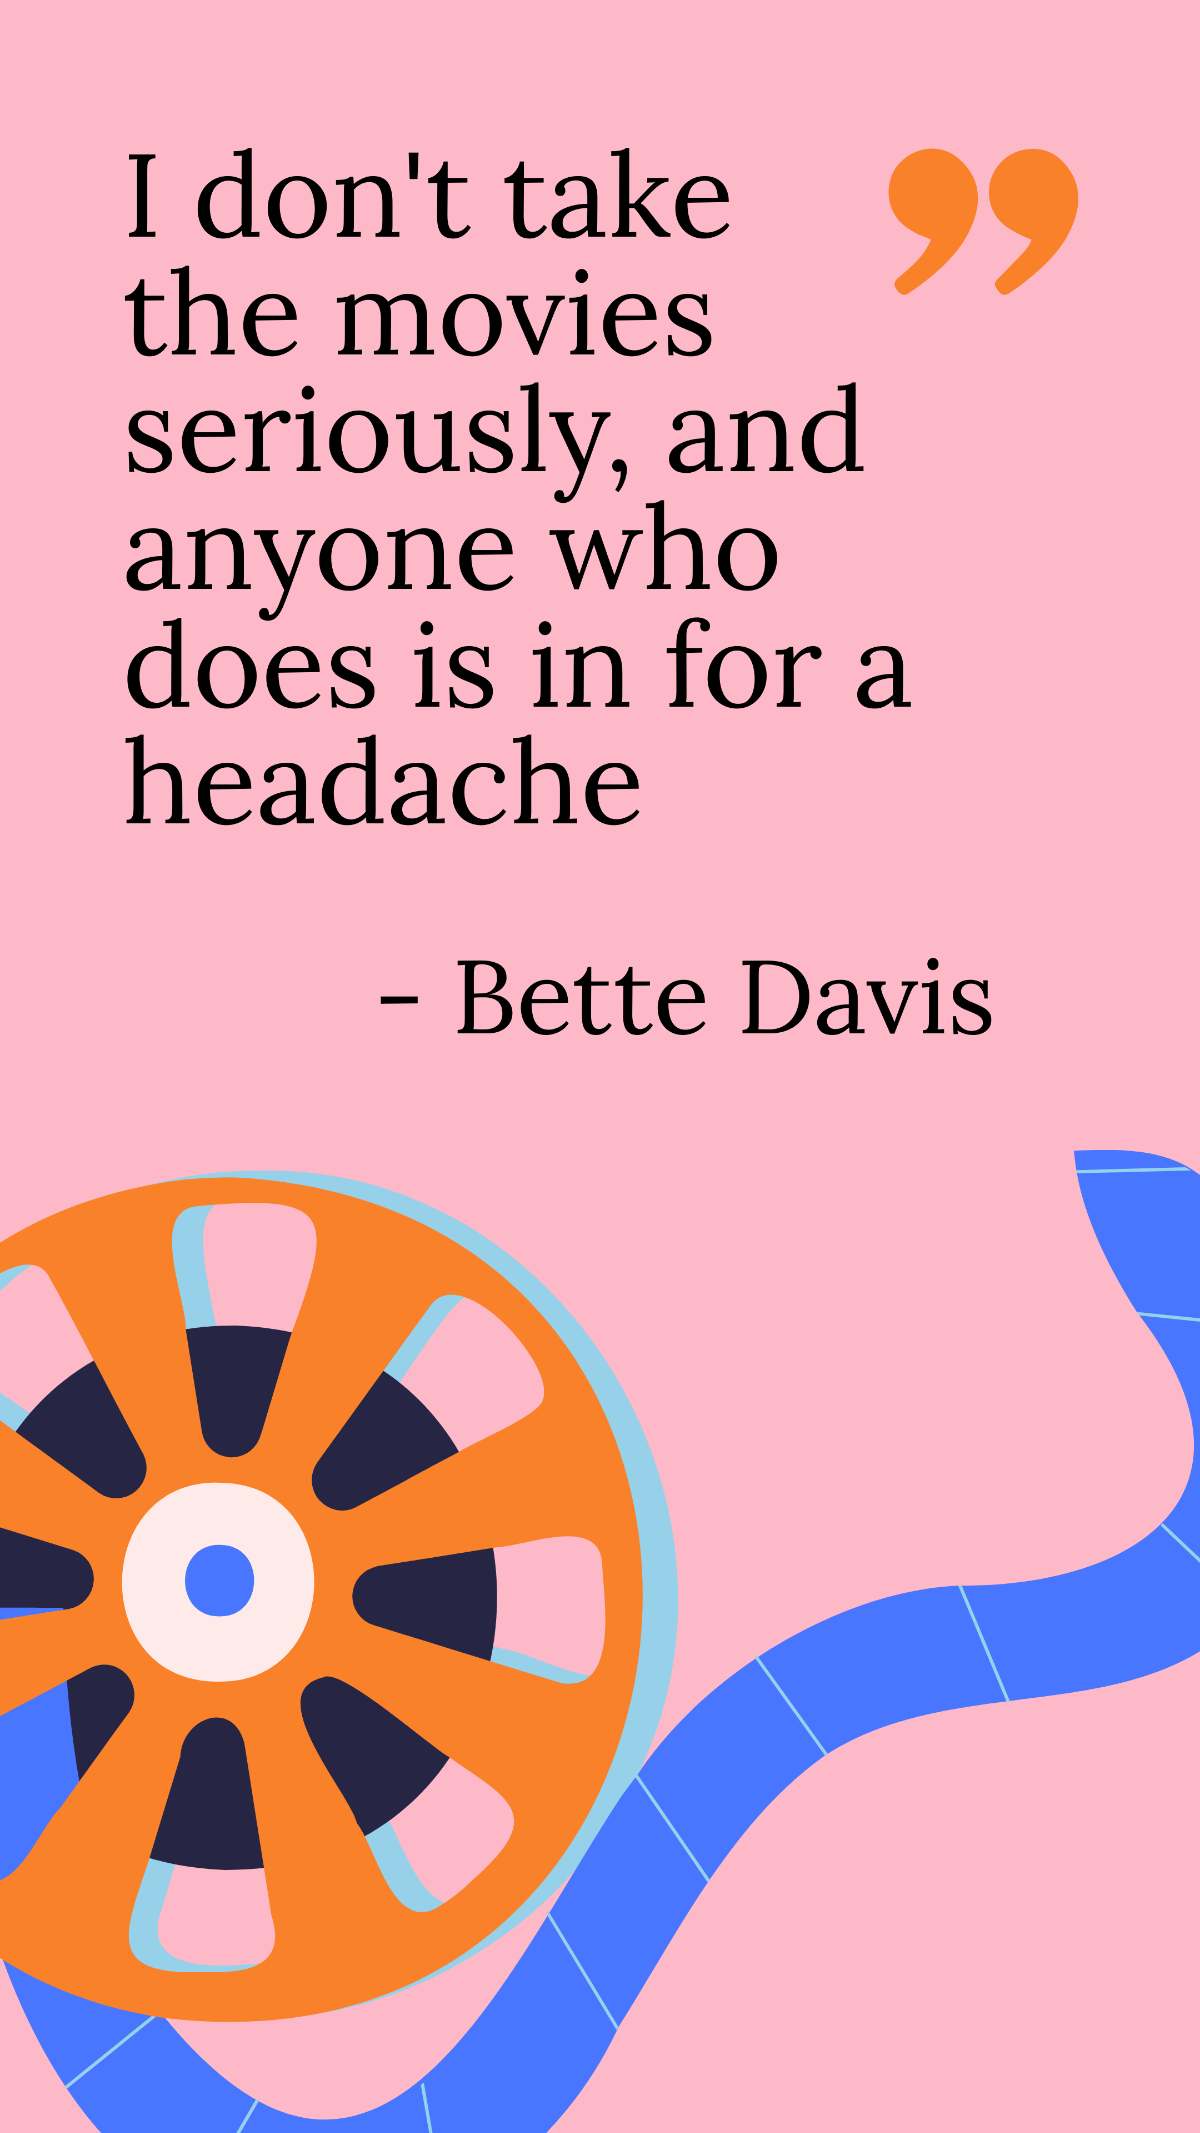 Bette Davis - I don't take the movies seriously, and anyone who does is in for a headache Template